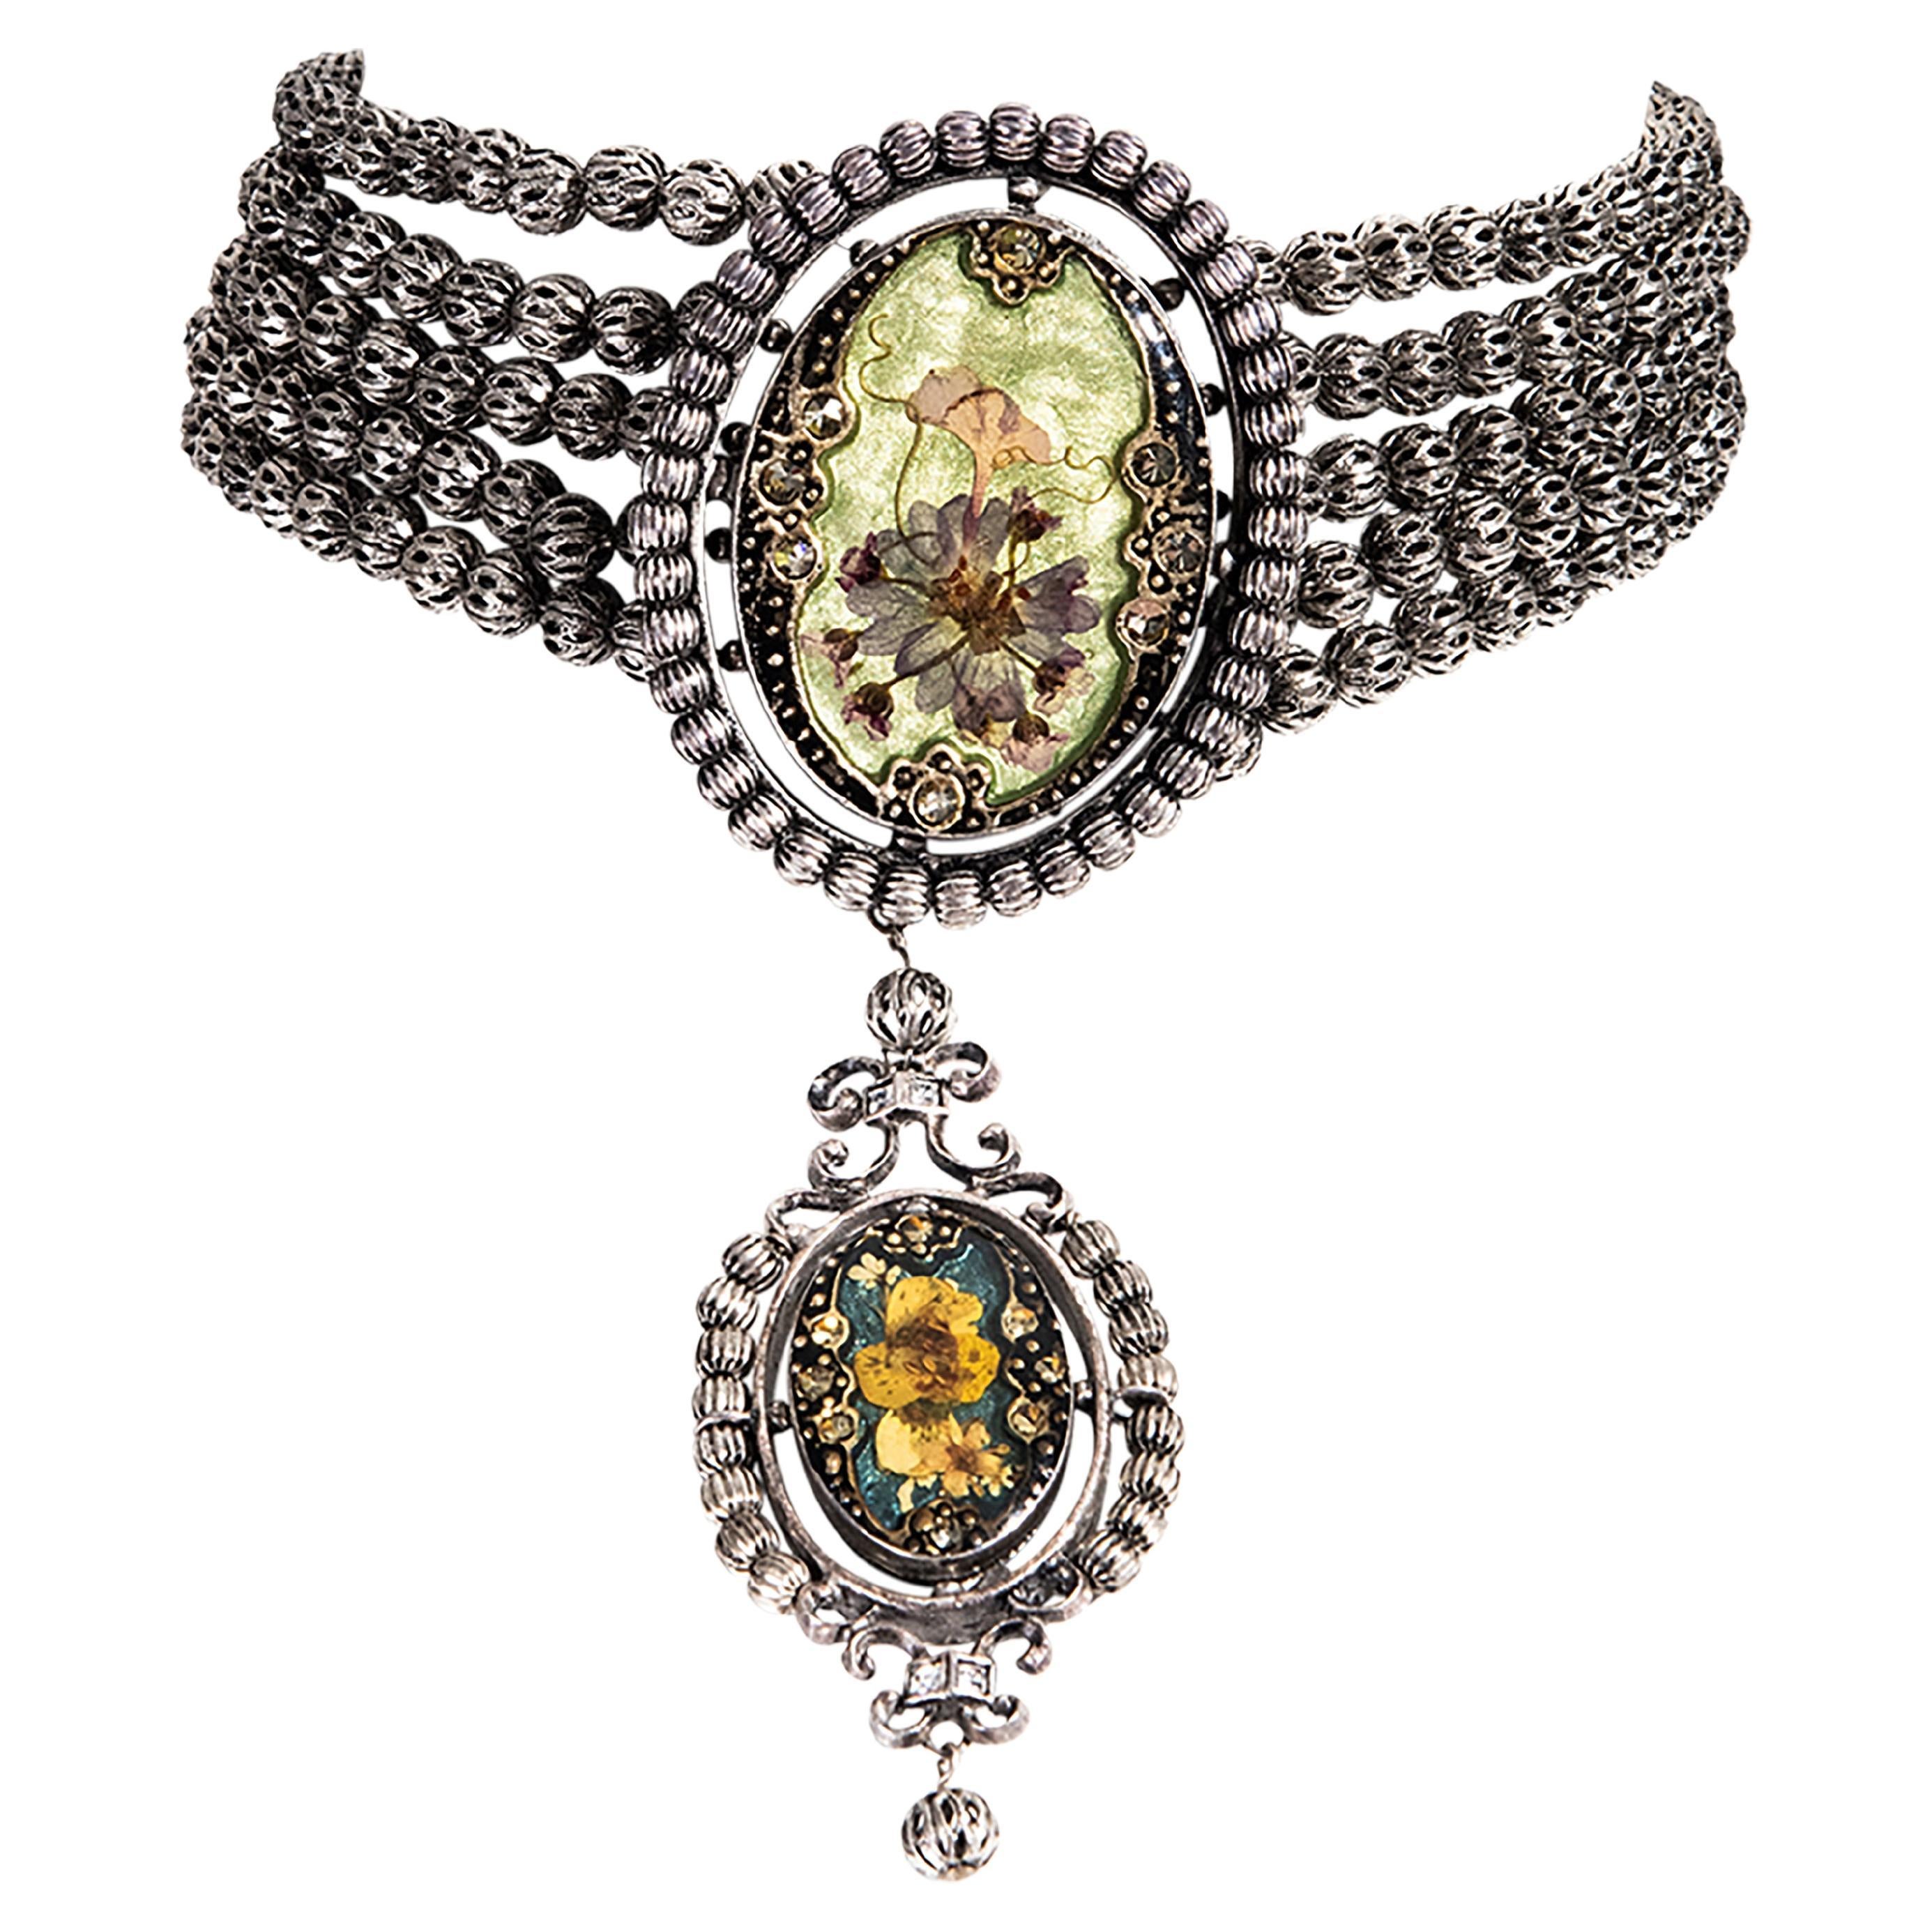 S/S 1998 Christian Dior by John Galliano Silver Cameo Choker Necklace